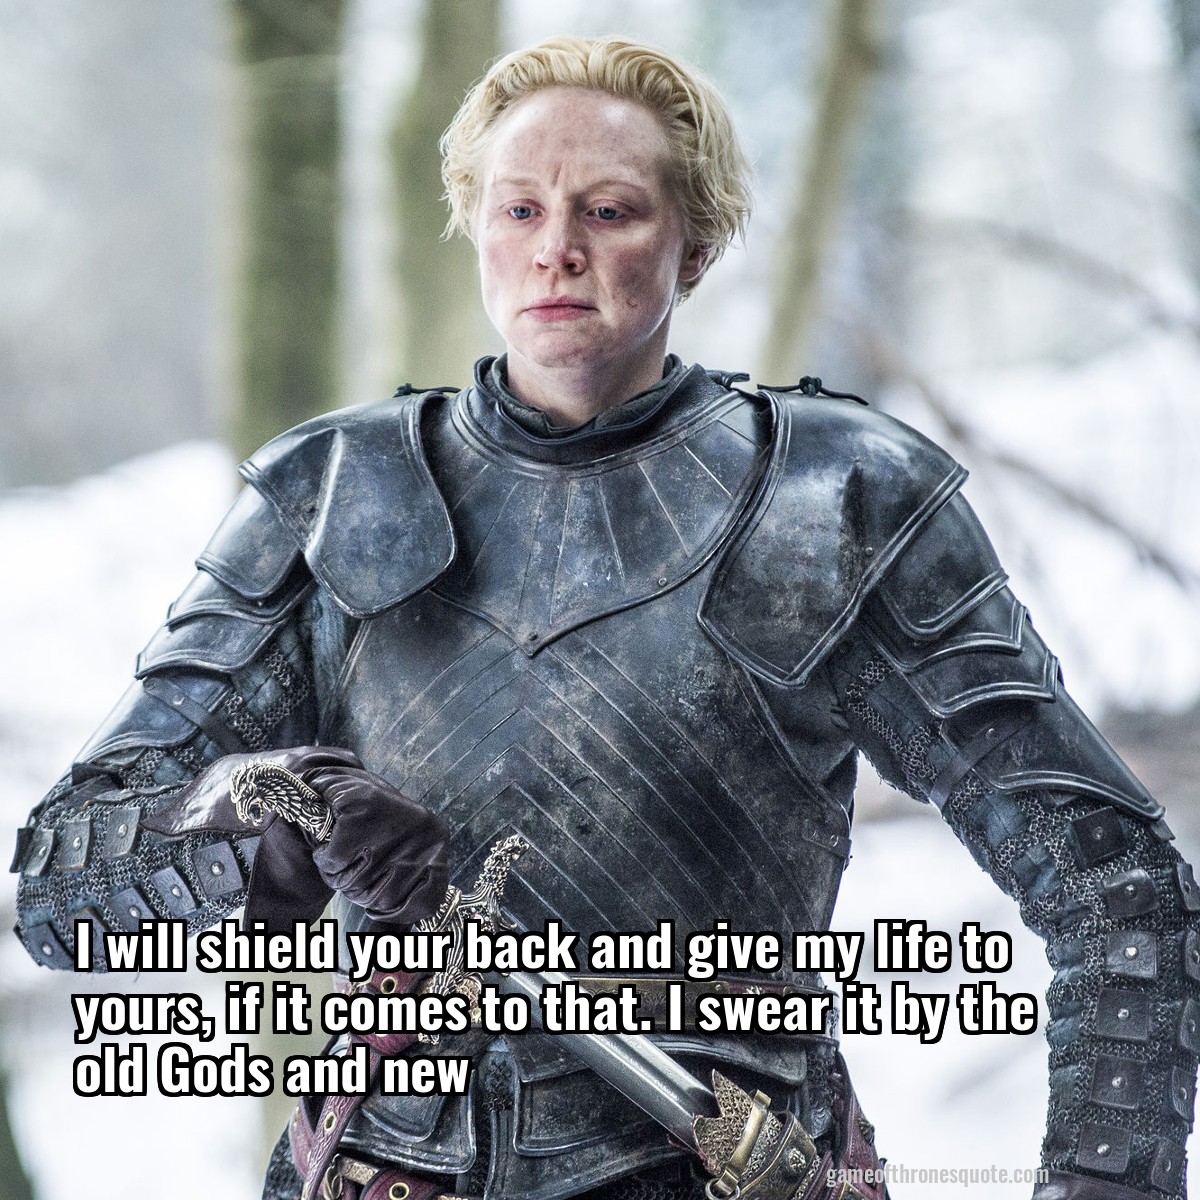 Brienne Tarth I Will Shield Your Back And Give My Life To Yours If It Game Of Thrones Quote